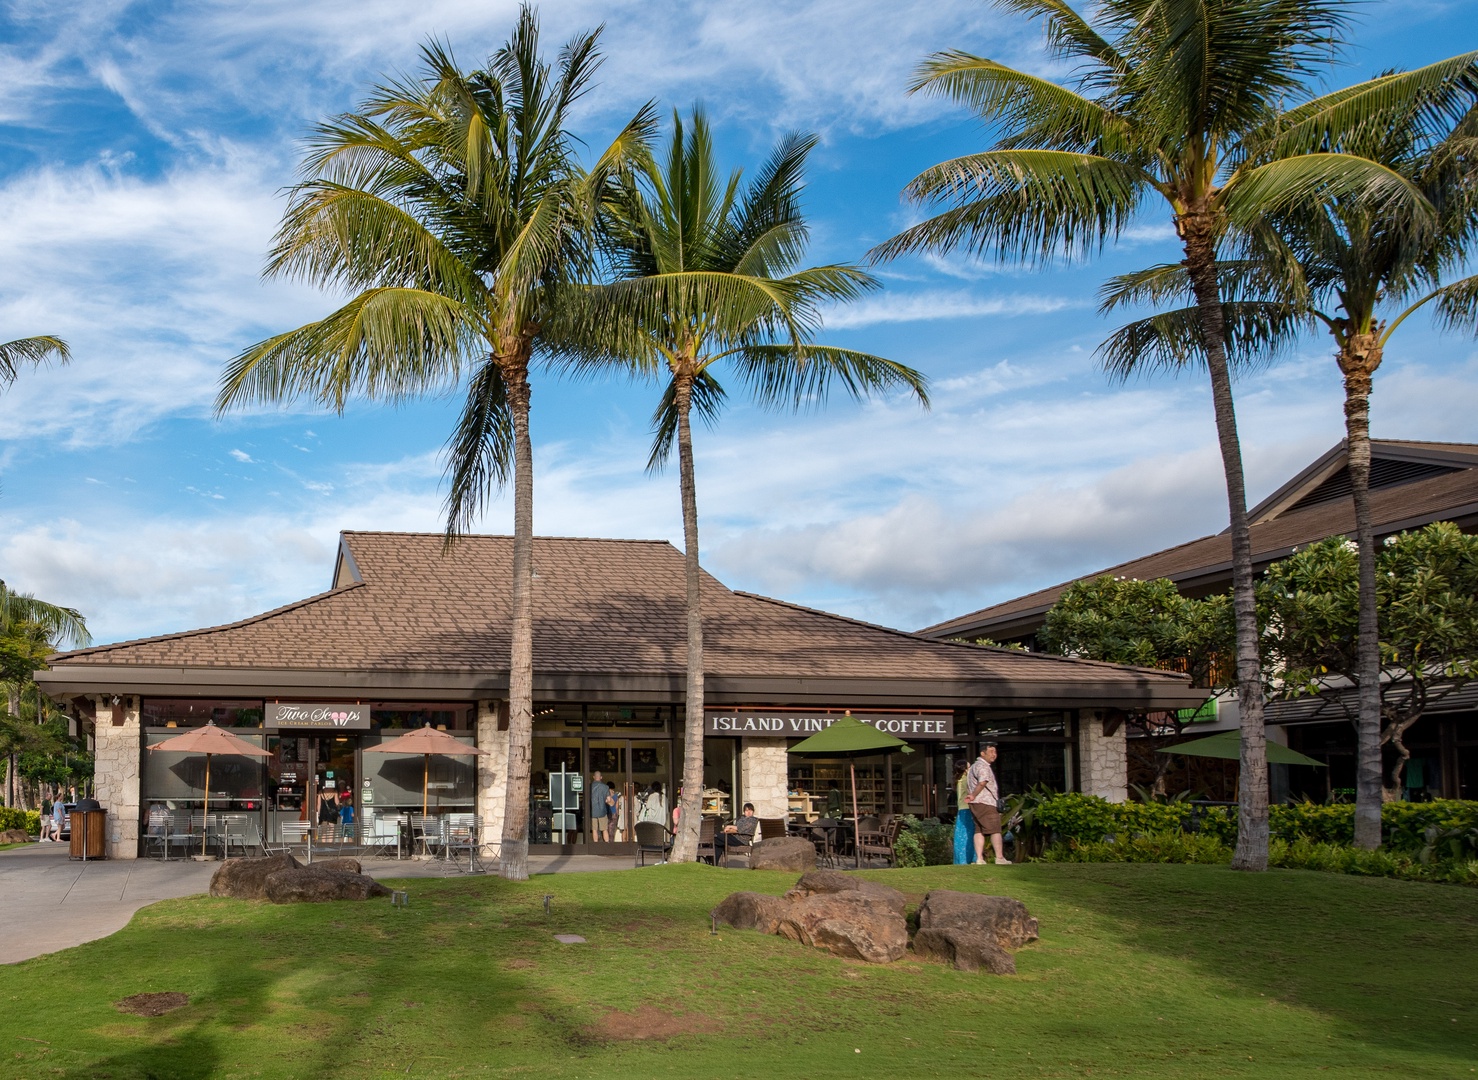 Kapolei Vacation Rentals, Kai Lani 21C - A peaceful day for a stroll through the island shops.